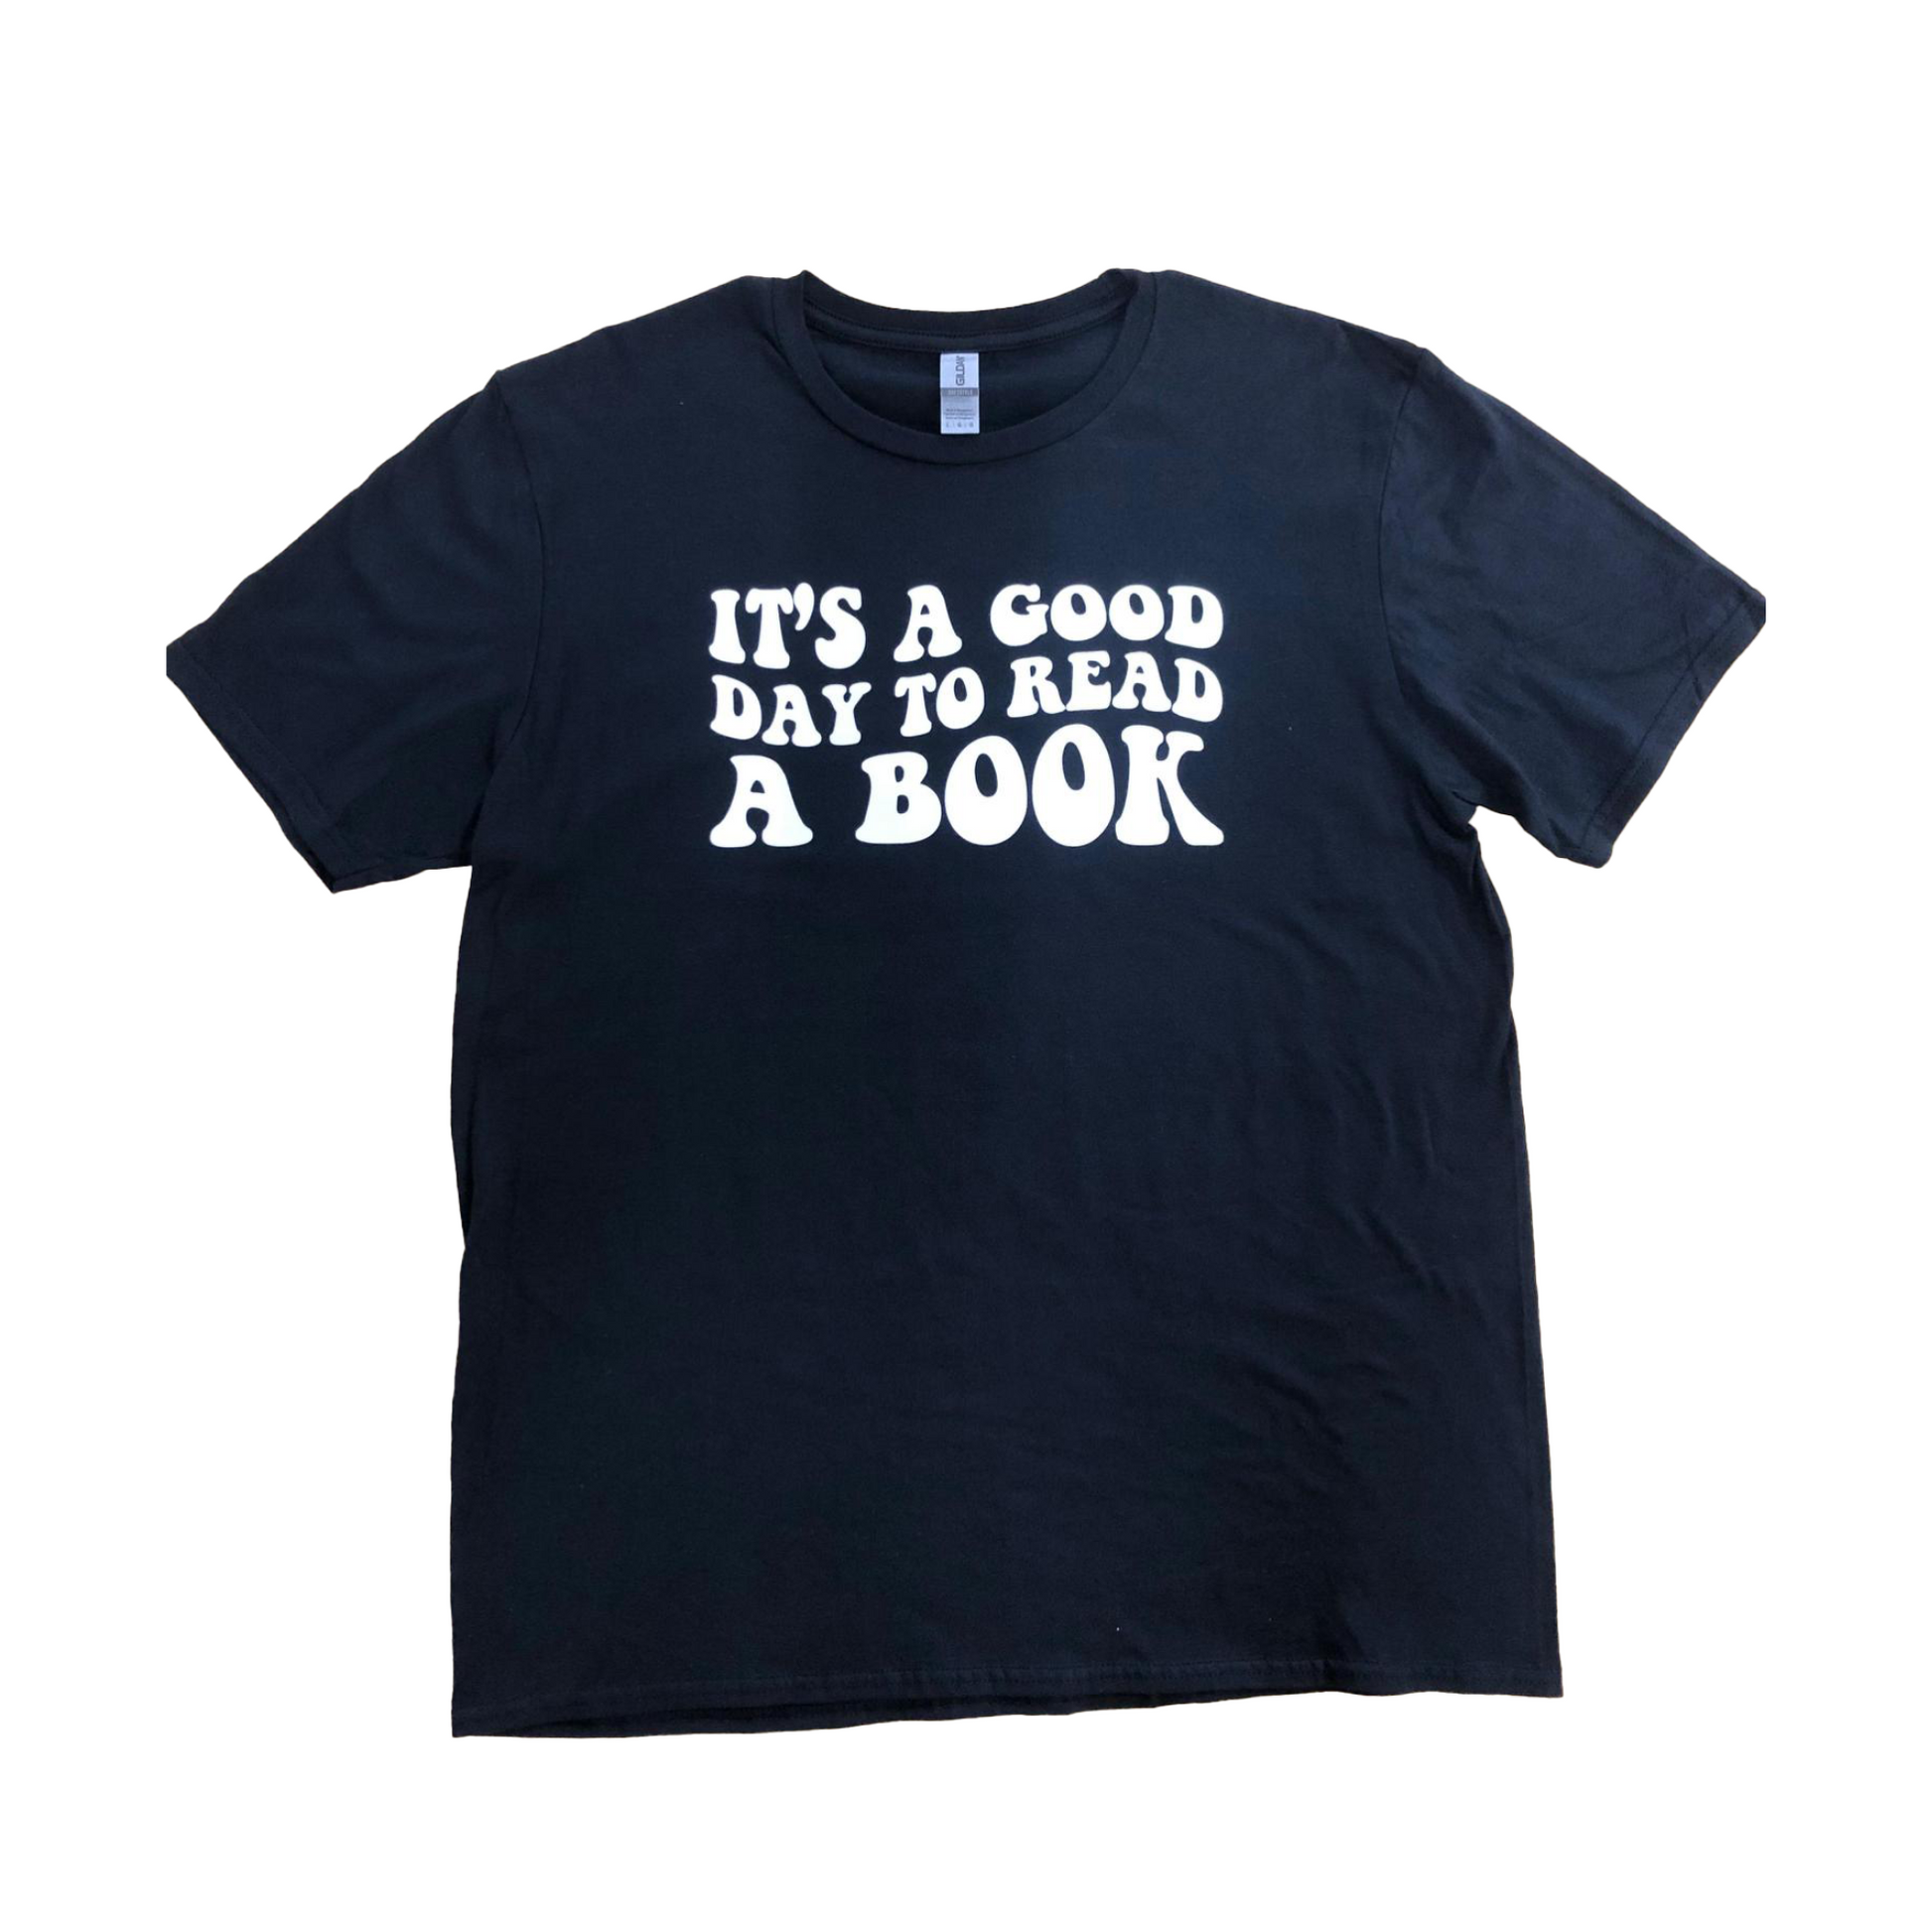 black tee with text "It's a Good Day to Read a Book"